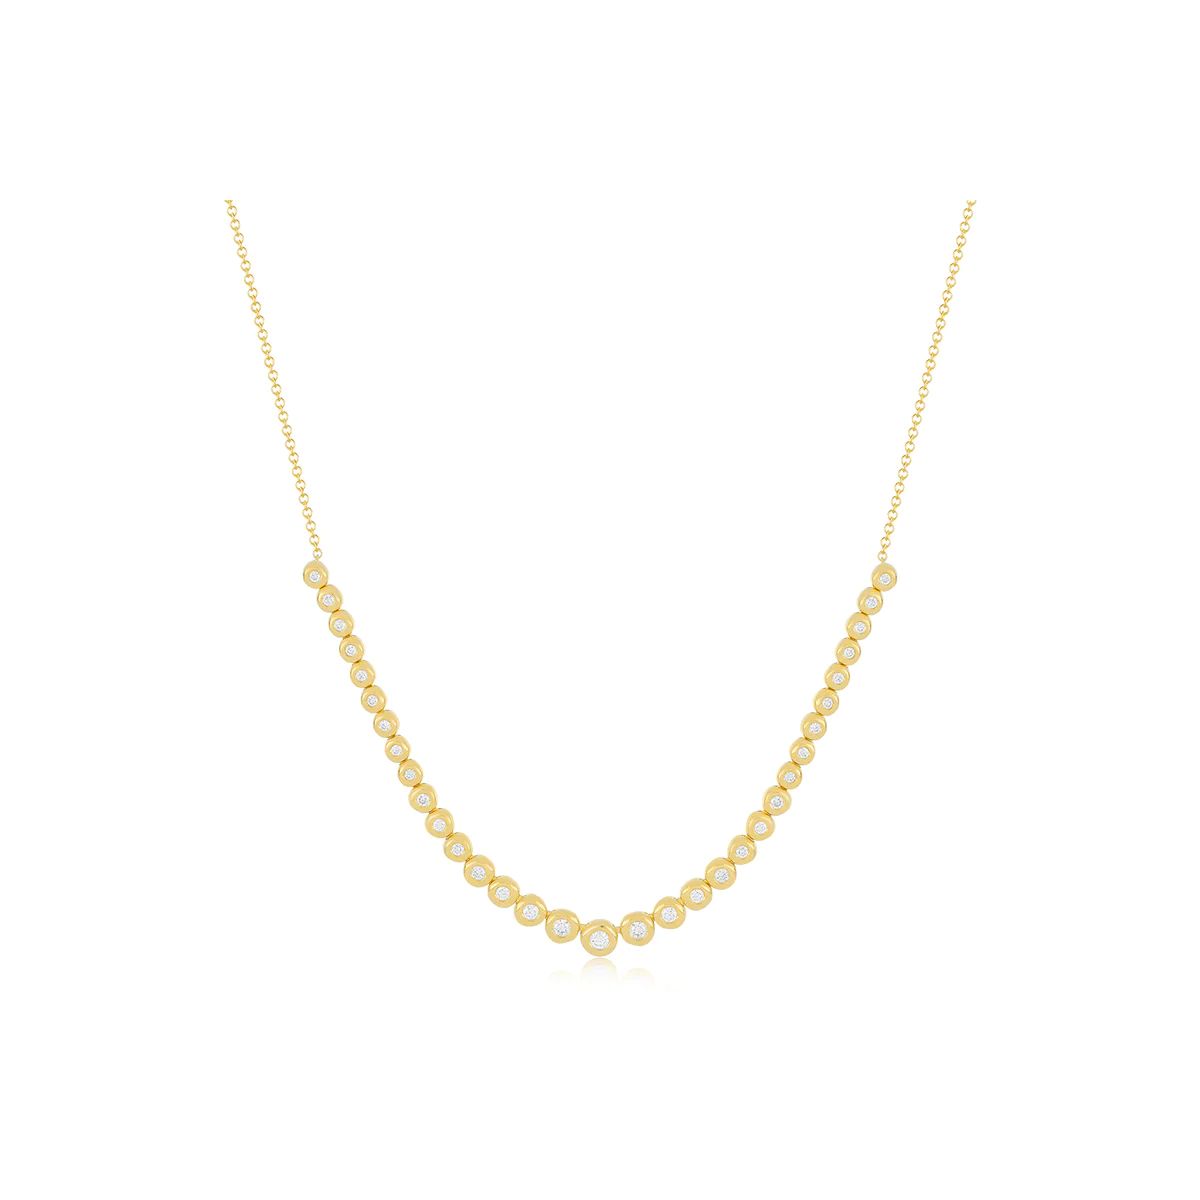 Graduated Diamond Pillow Necklace | EF Collection